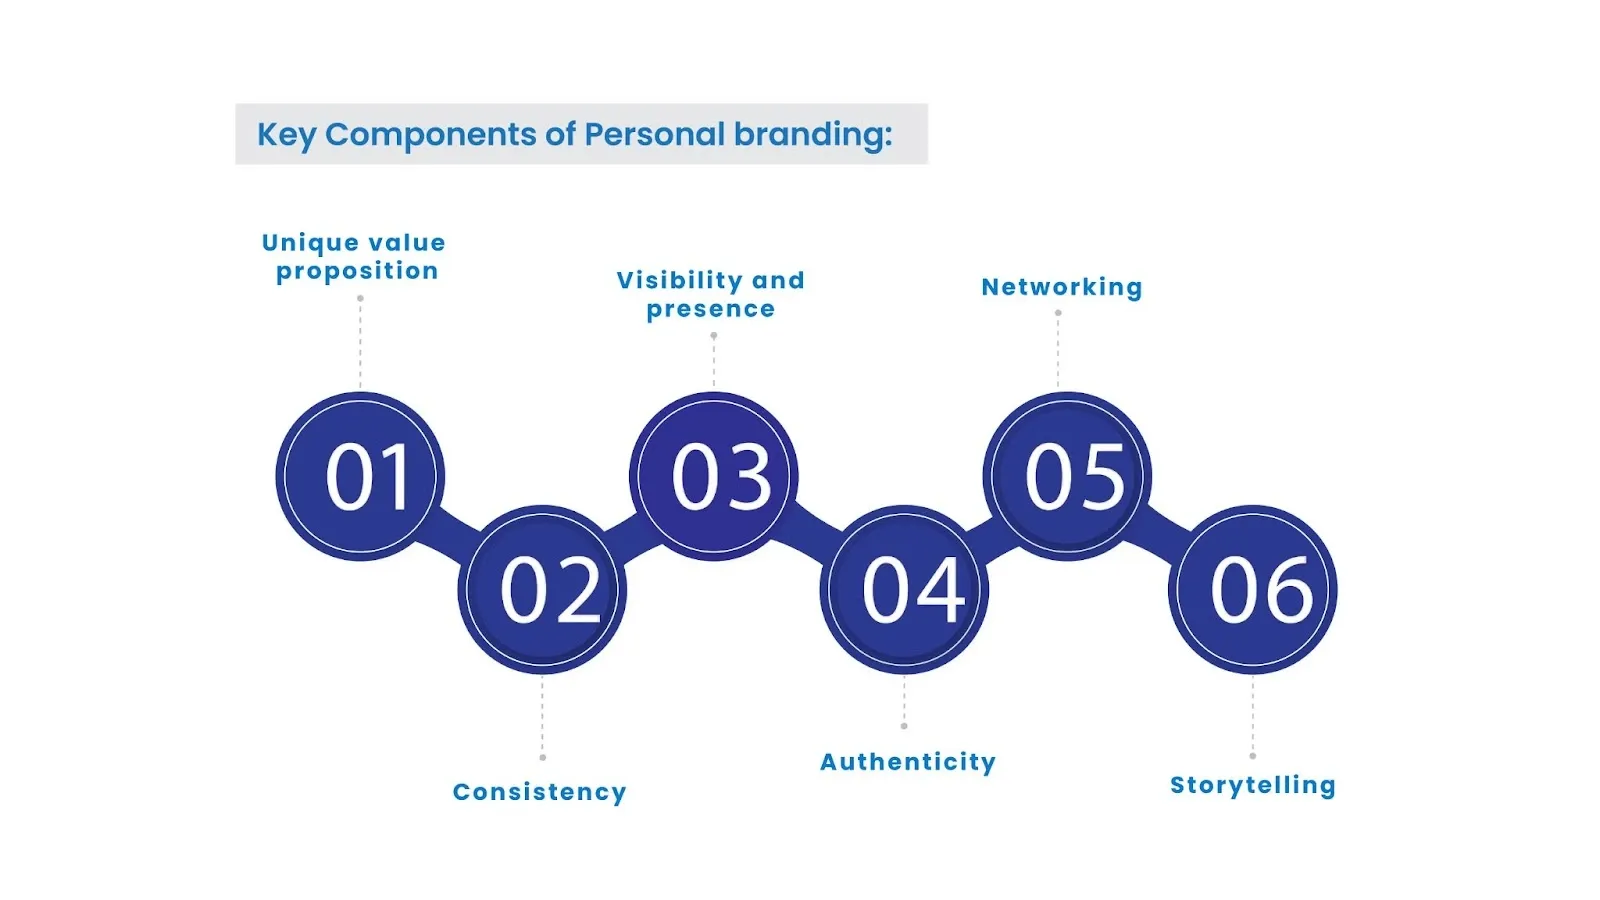 image representing key components of personal branding for professionals